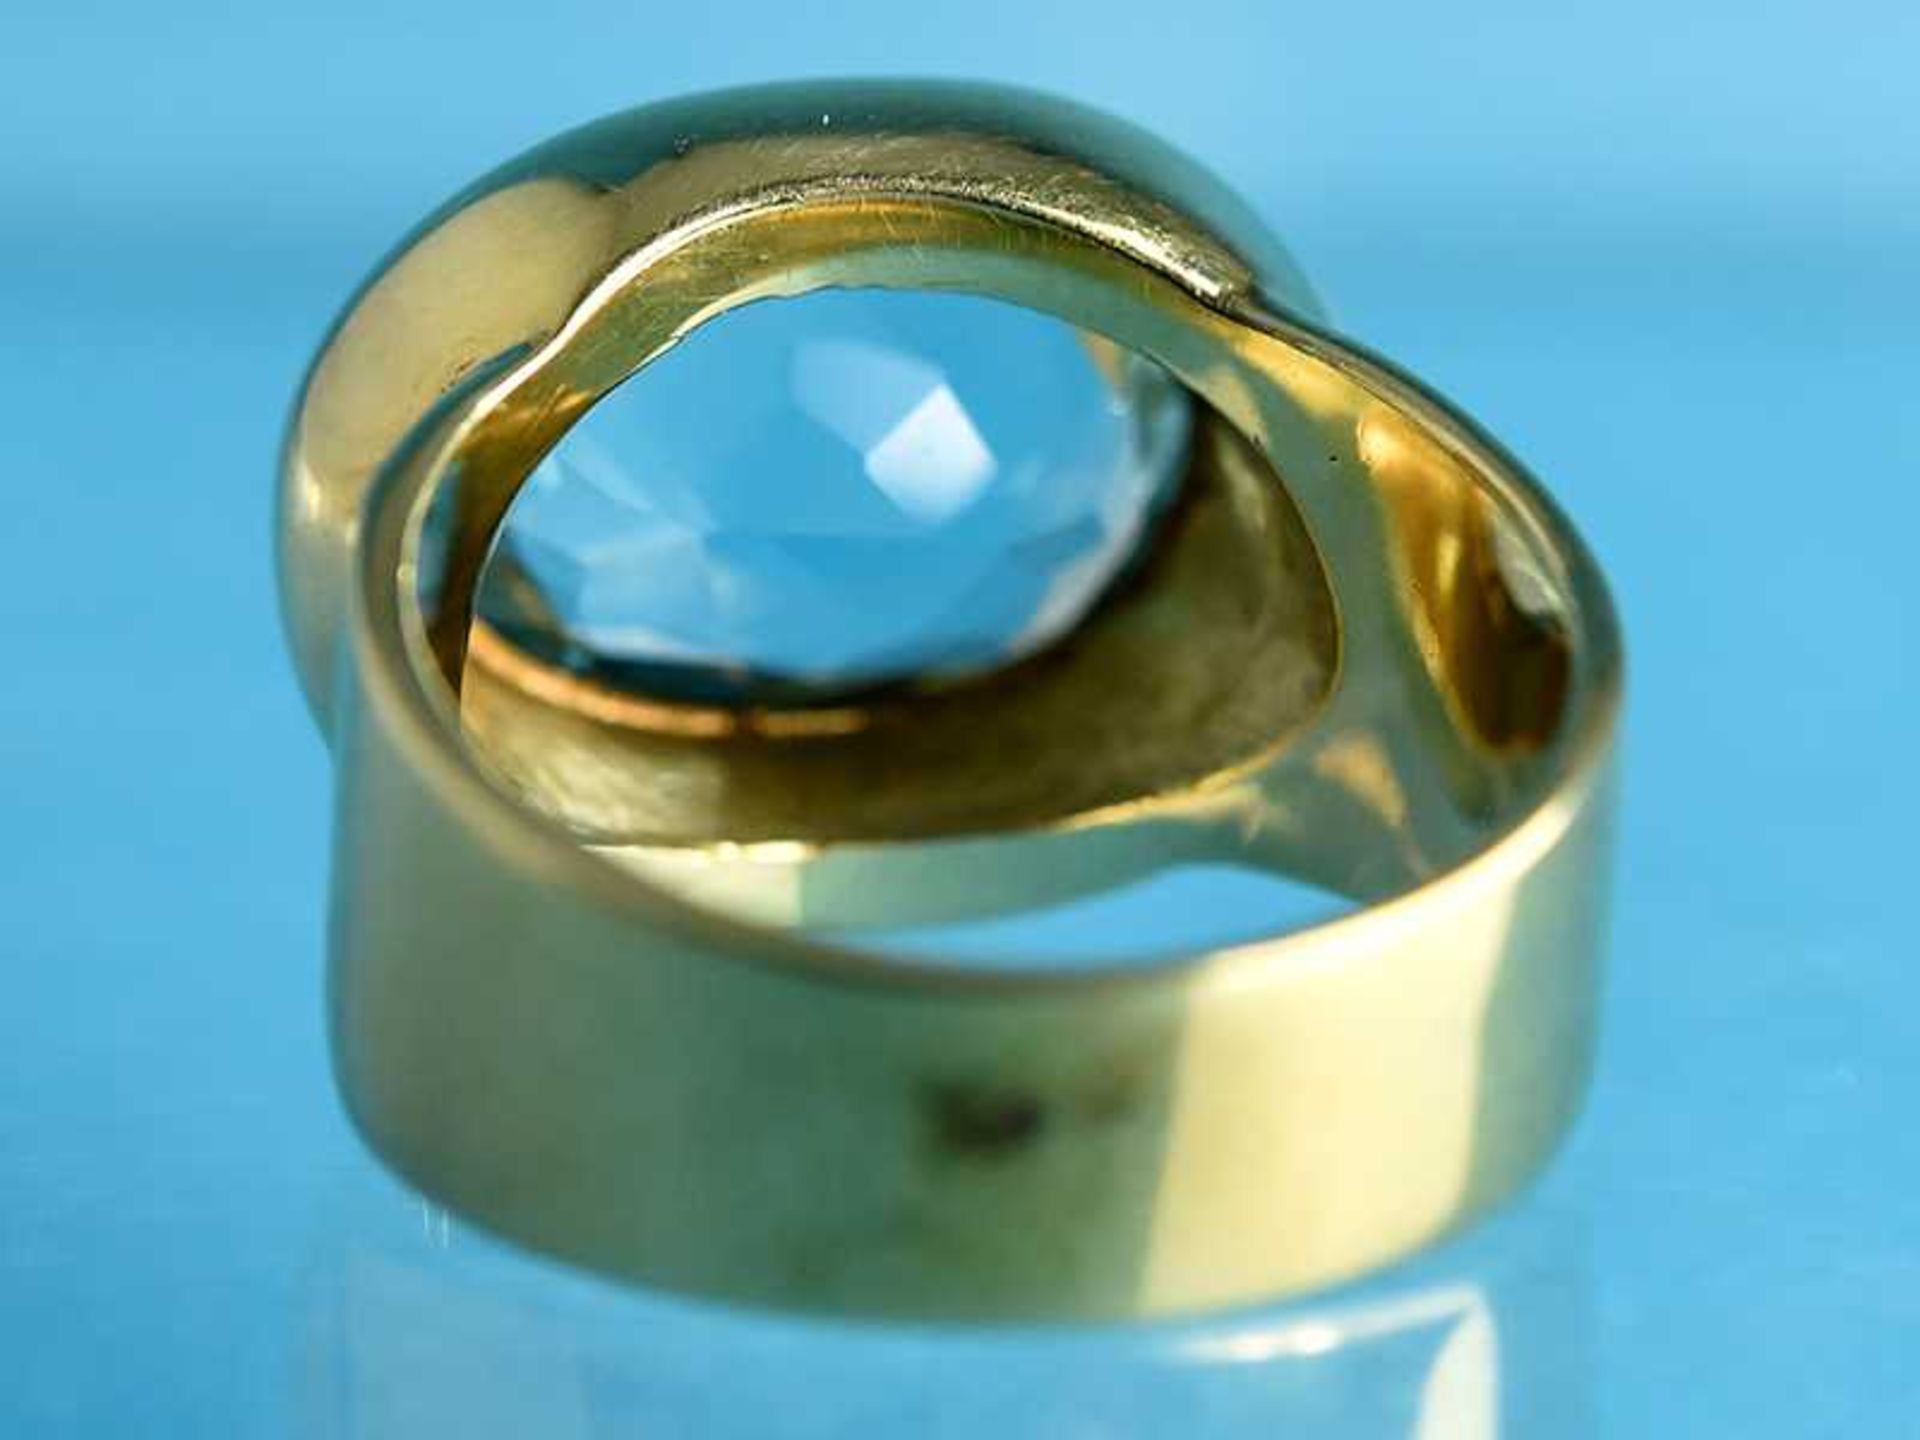 Massiver Bandring mit Aquamarin ca. 5,8 ct, Goldschmiedearbeit, 20. Jh. 585/- Gelbgold. - Image 3 of 10